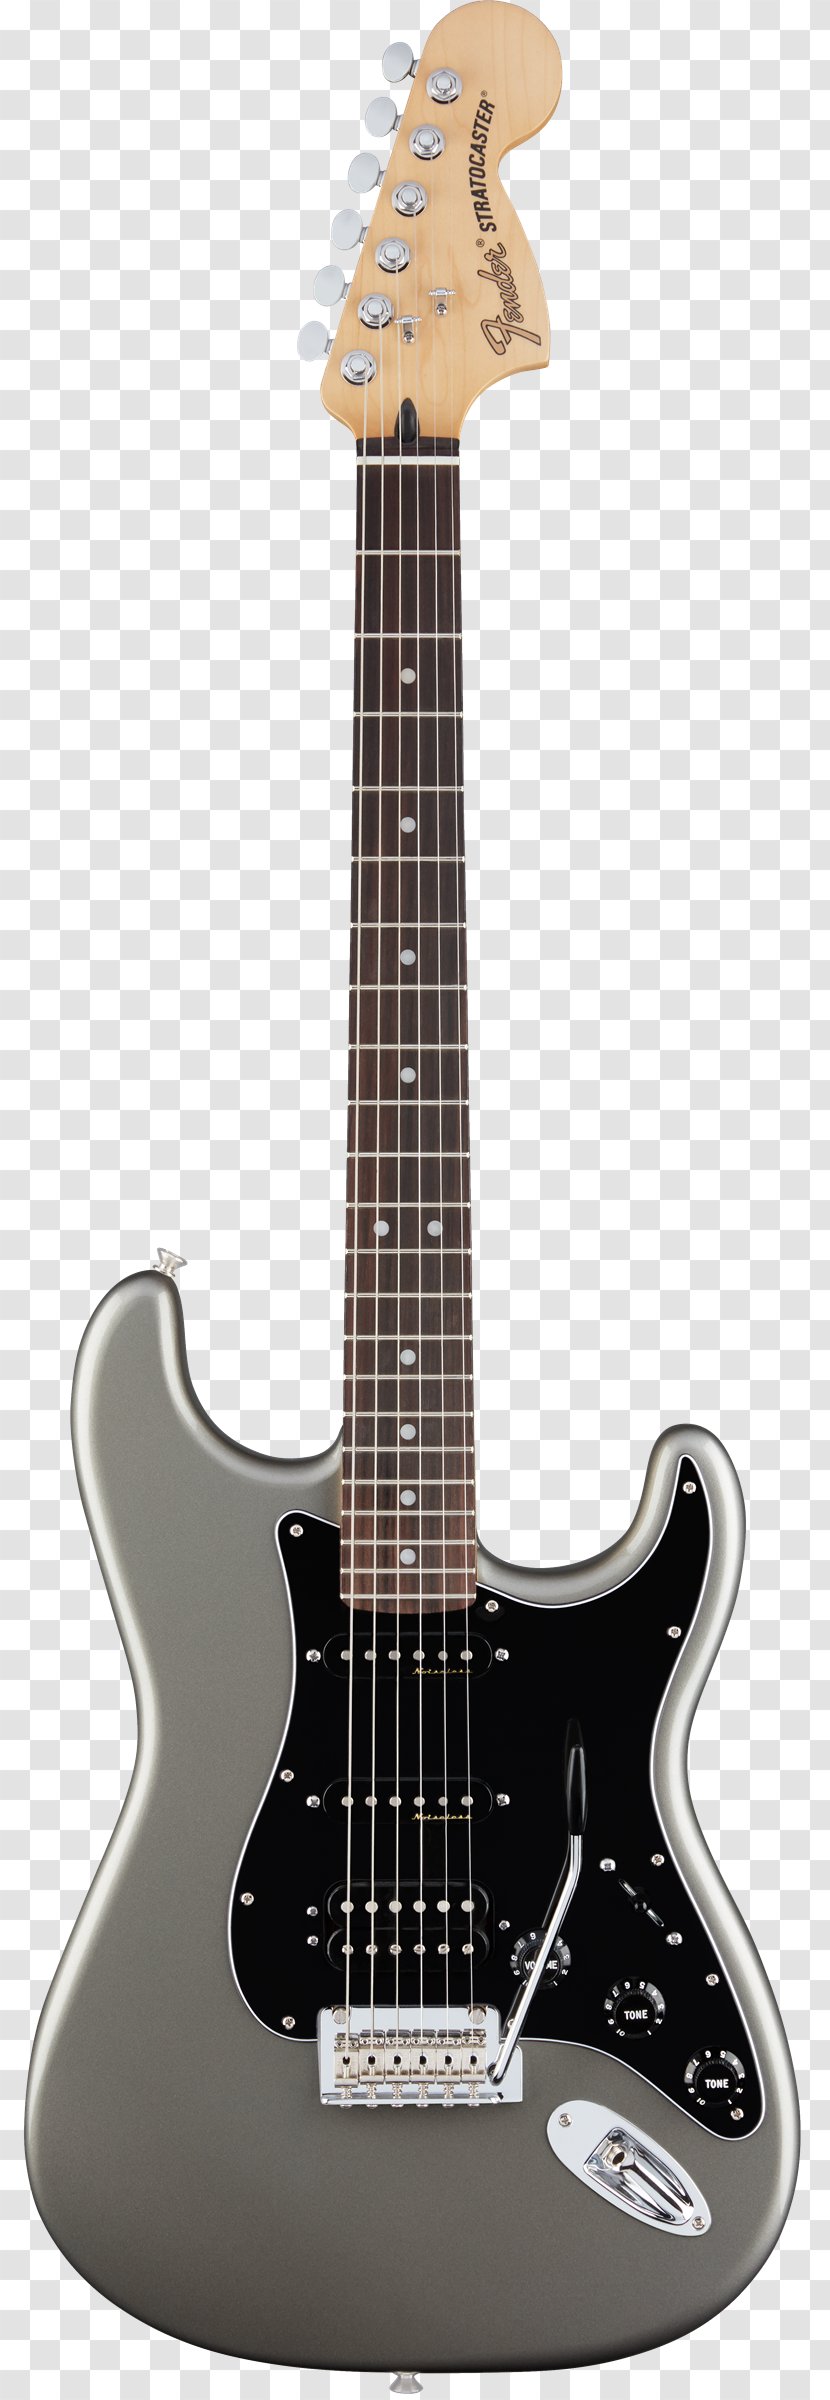 Fender Stratocaster Telecaster Deluxe Musical Instruments Corporation Guitar - String - Electric Transparent PNG